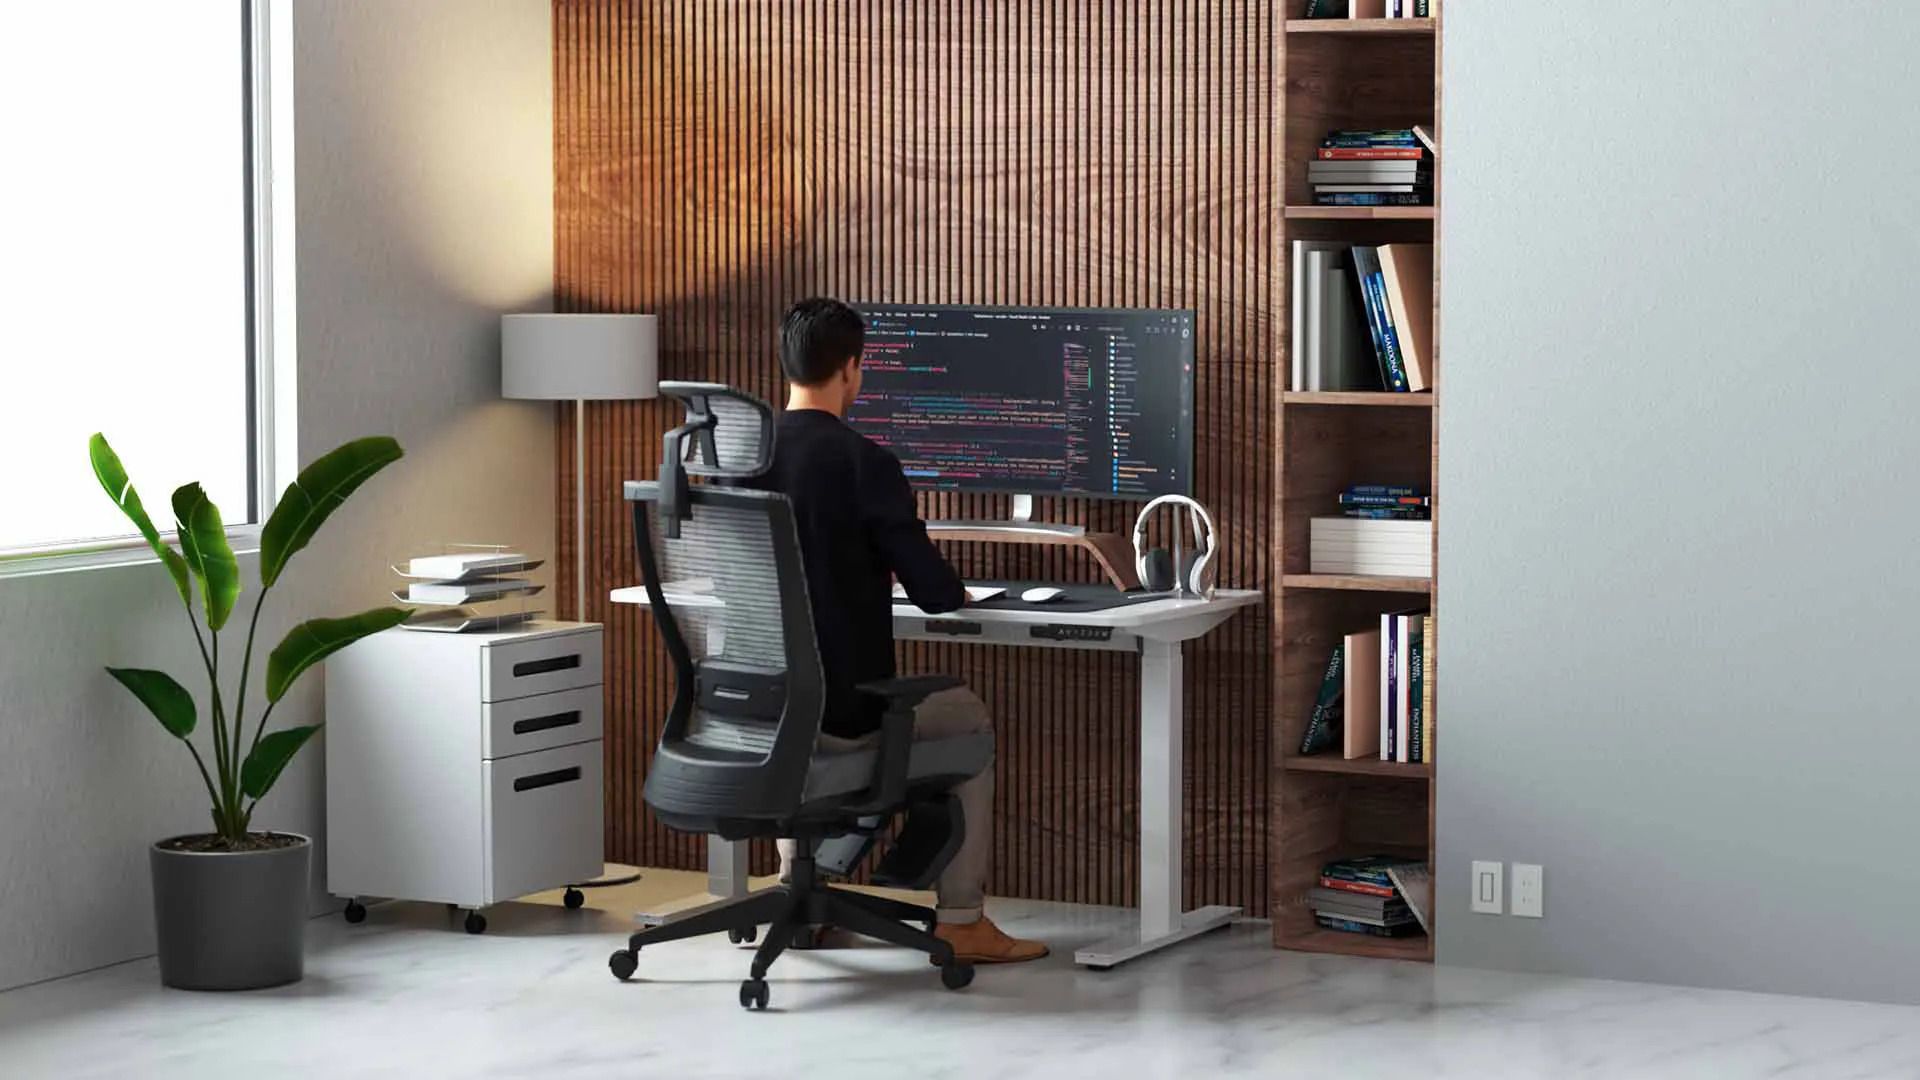 10 Home Office Setup Ideas to Help You Work From Anywhere